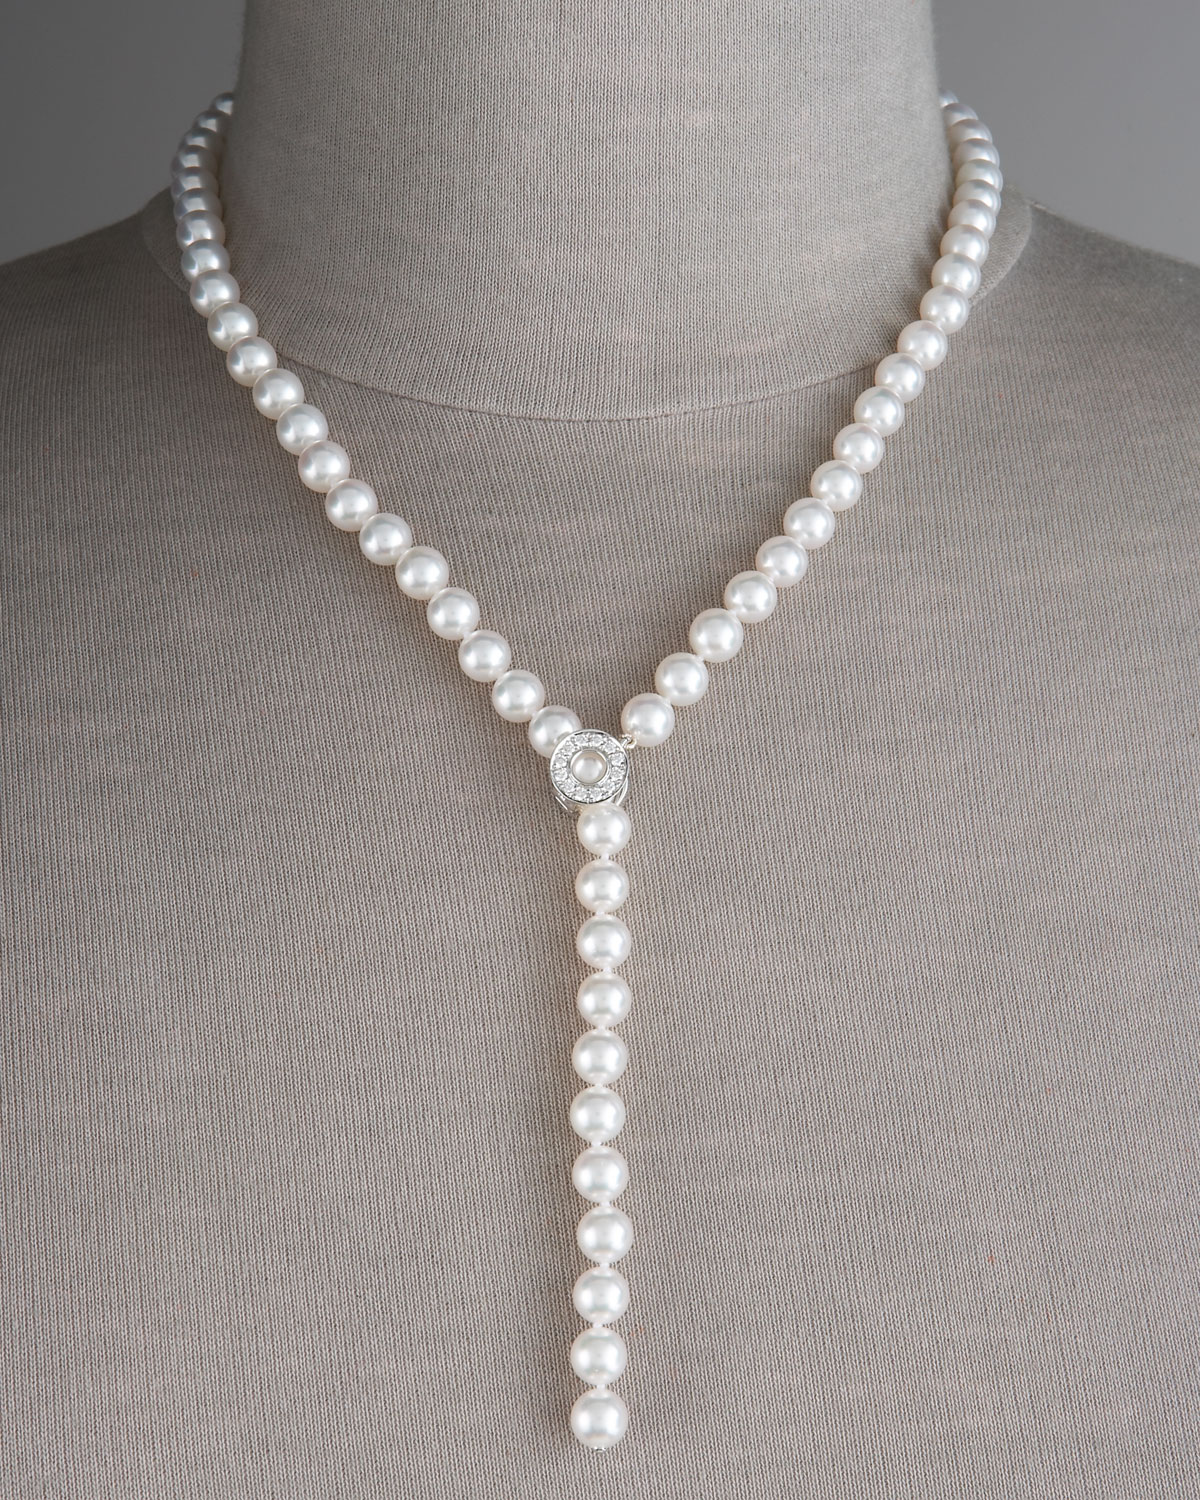 Mikimoto adds to its Regalia high jewellery collection with jewels that ...